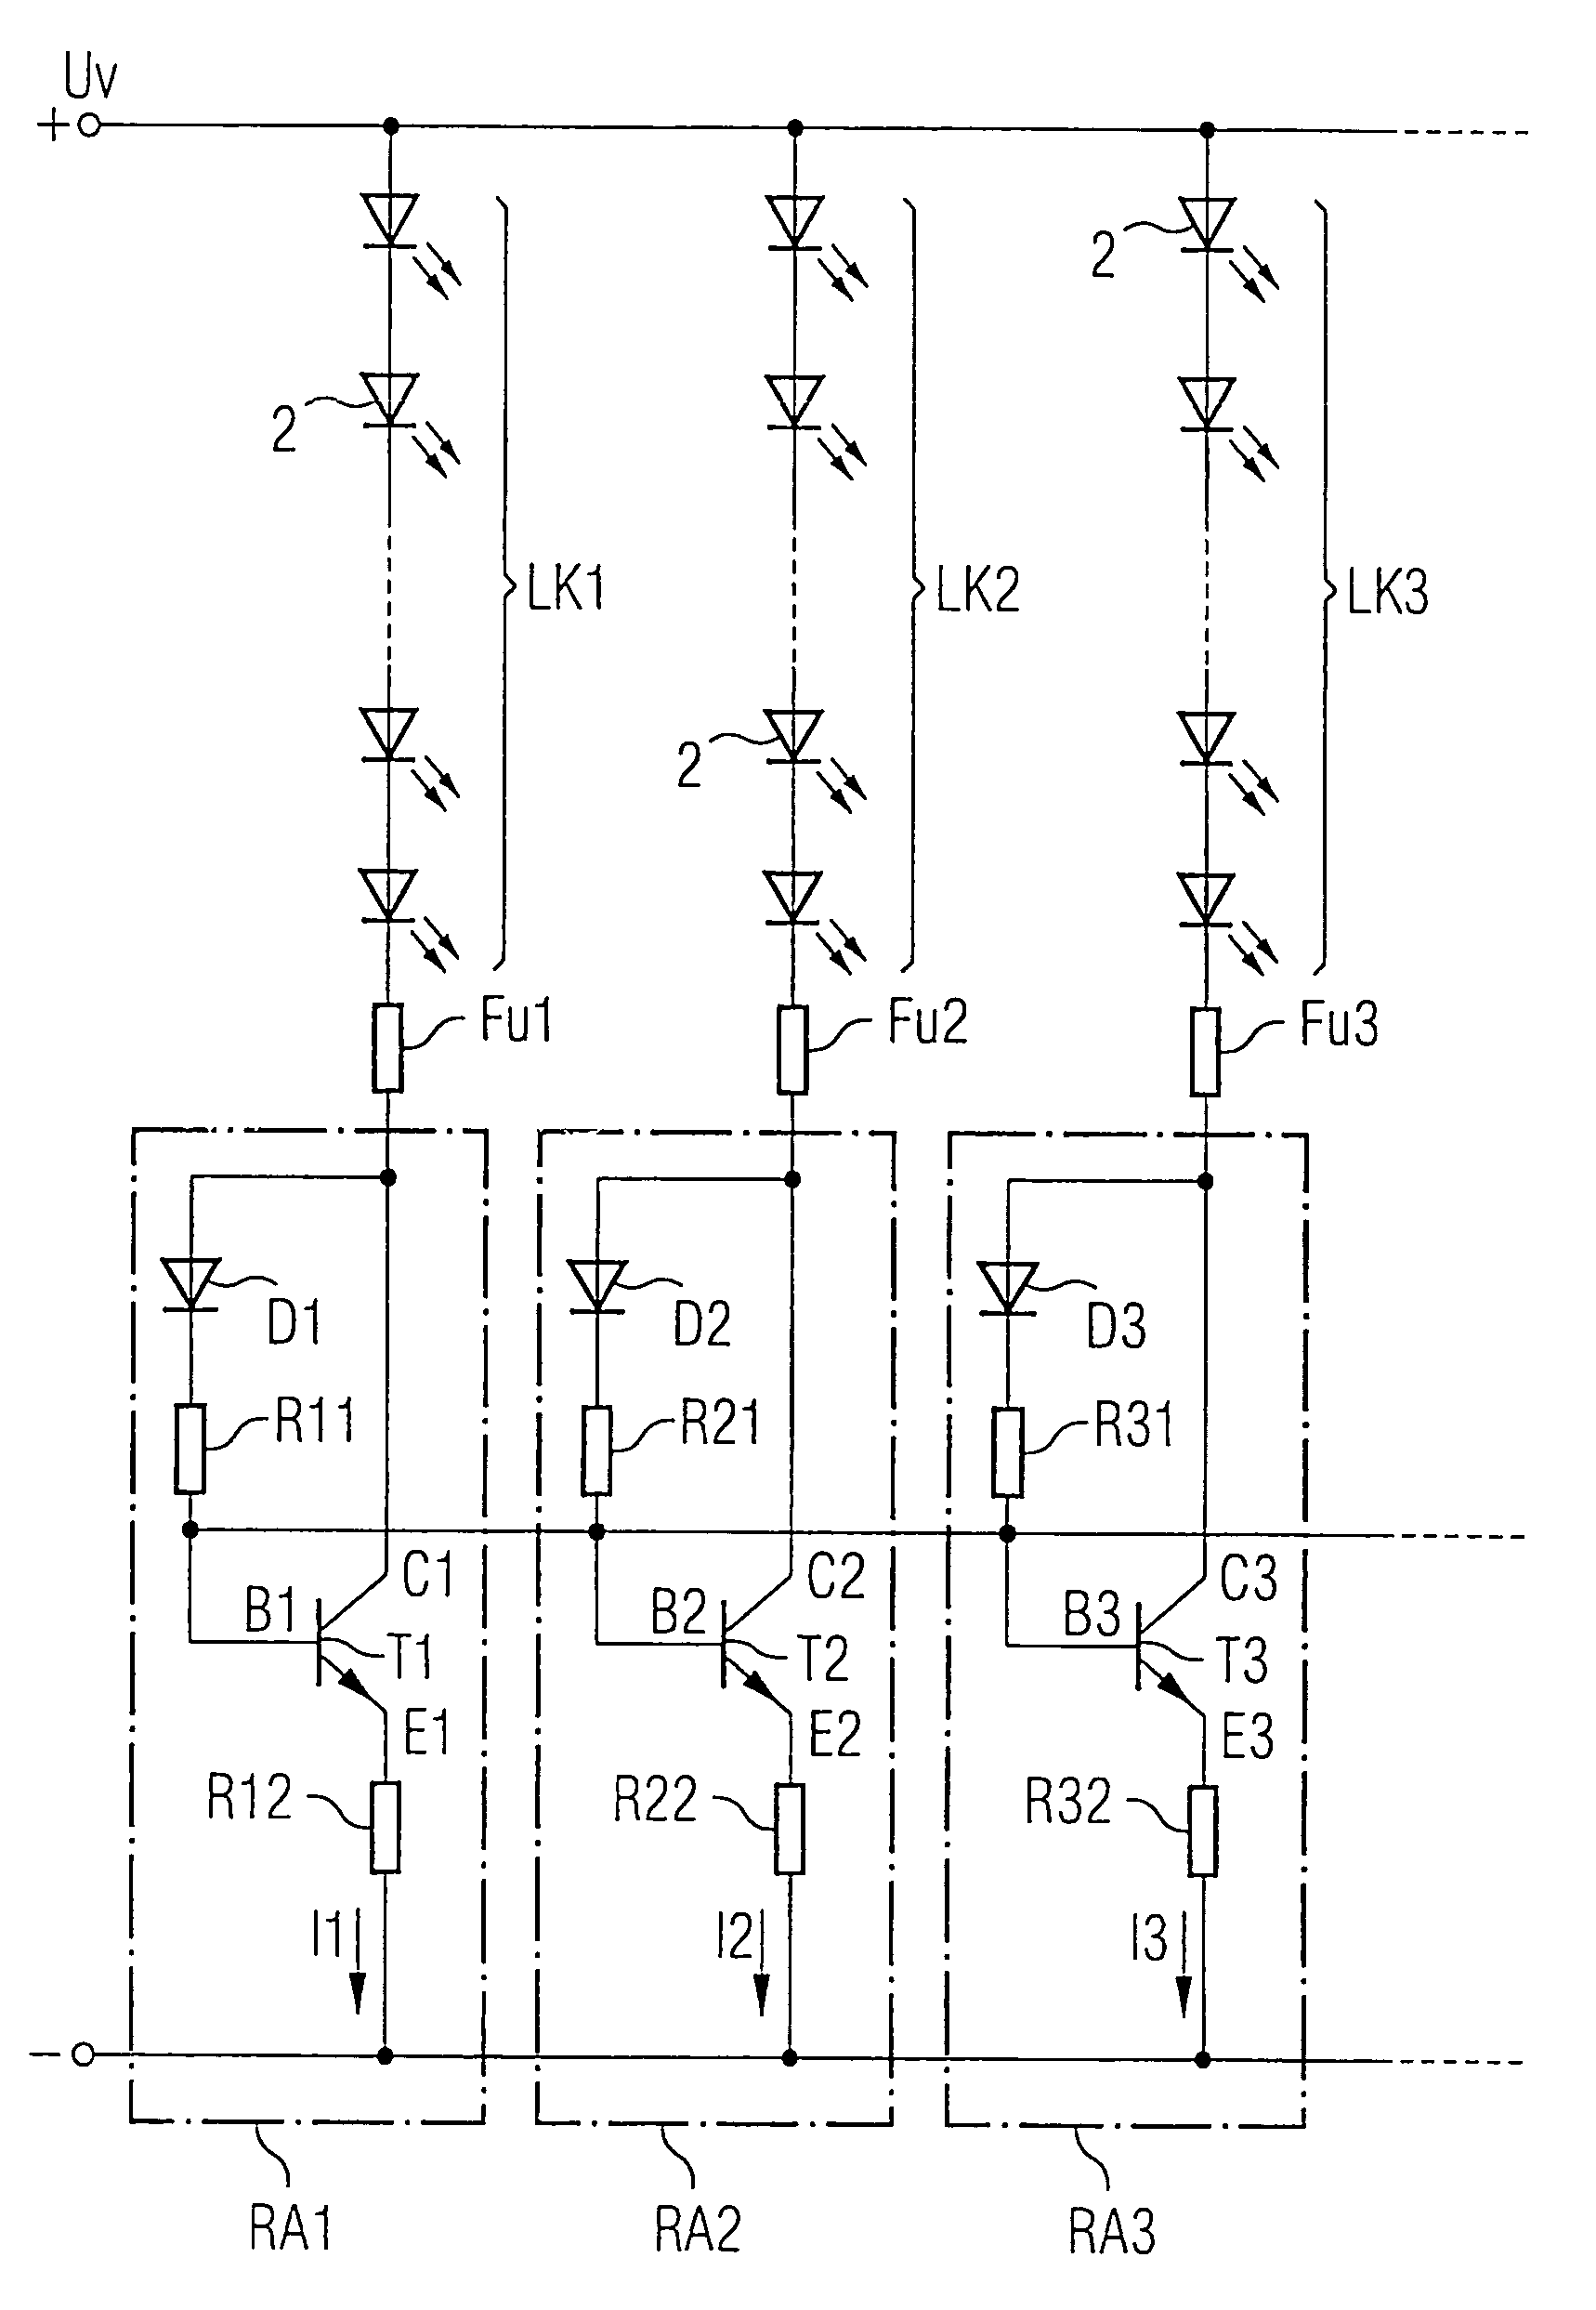 Circuit for an LED array